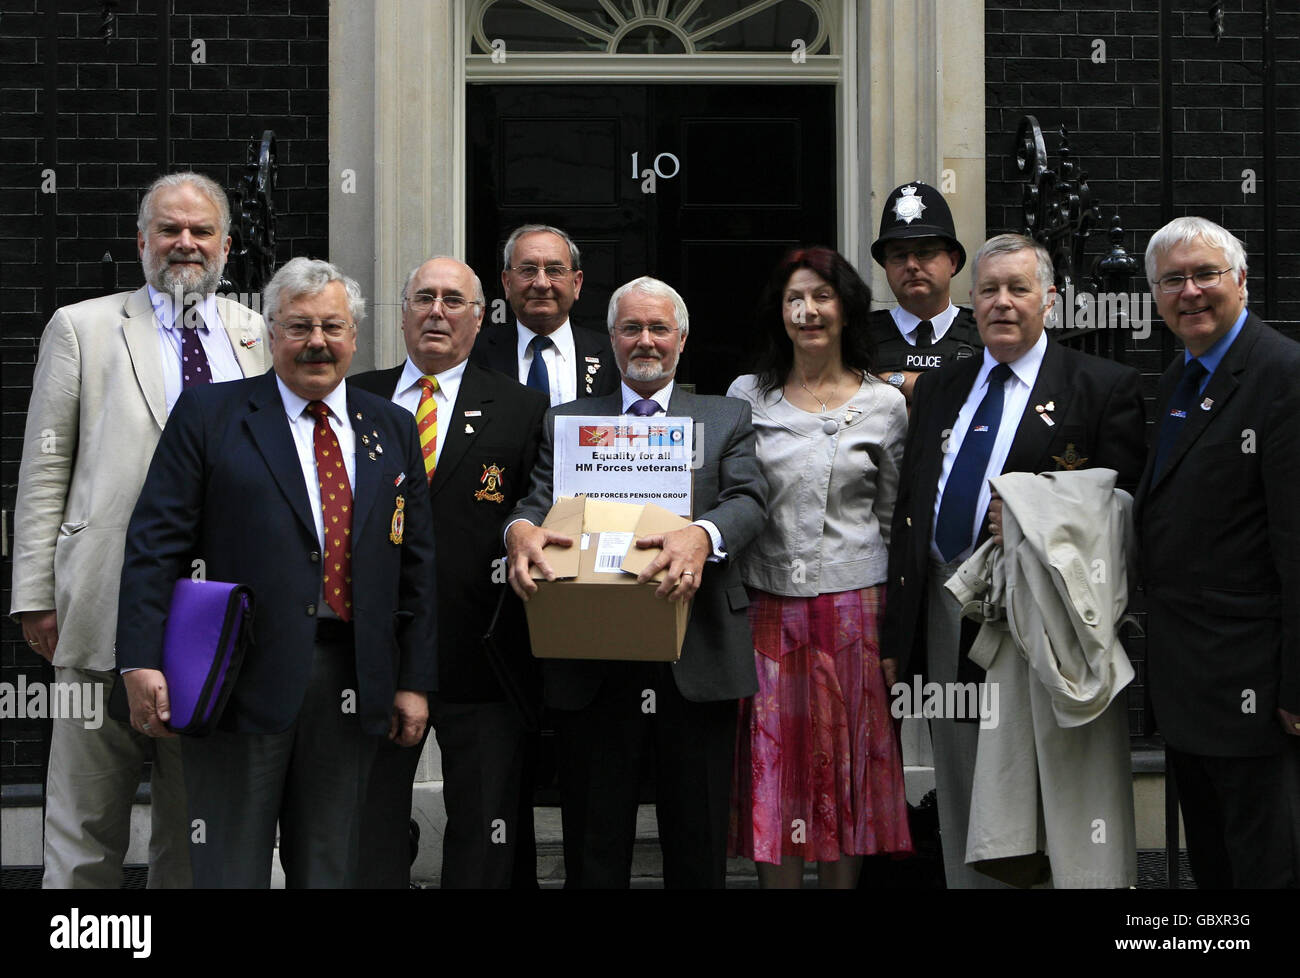 Members and supporters of the Armed Forces Pension Group (AFPG) hand in a petition, signed by almost 200,000 people demanding pension rights for ex-servicemen and women, to 10 Downing Street in central London, (left to right) the Labour MP for Morley and Rothwell Colin Challen, Brian Allinson, Sid West, Mike Steel, David Nebard, June Cavender, Richard Putnam and the Liberal Democrat MP for Colchester Bob Russell. Stock Photo